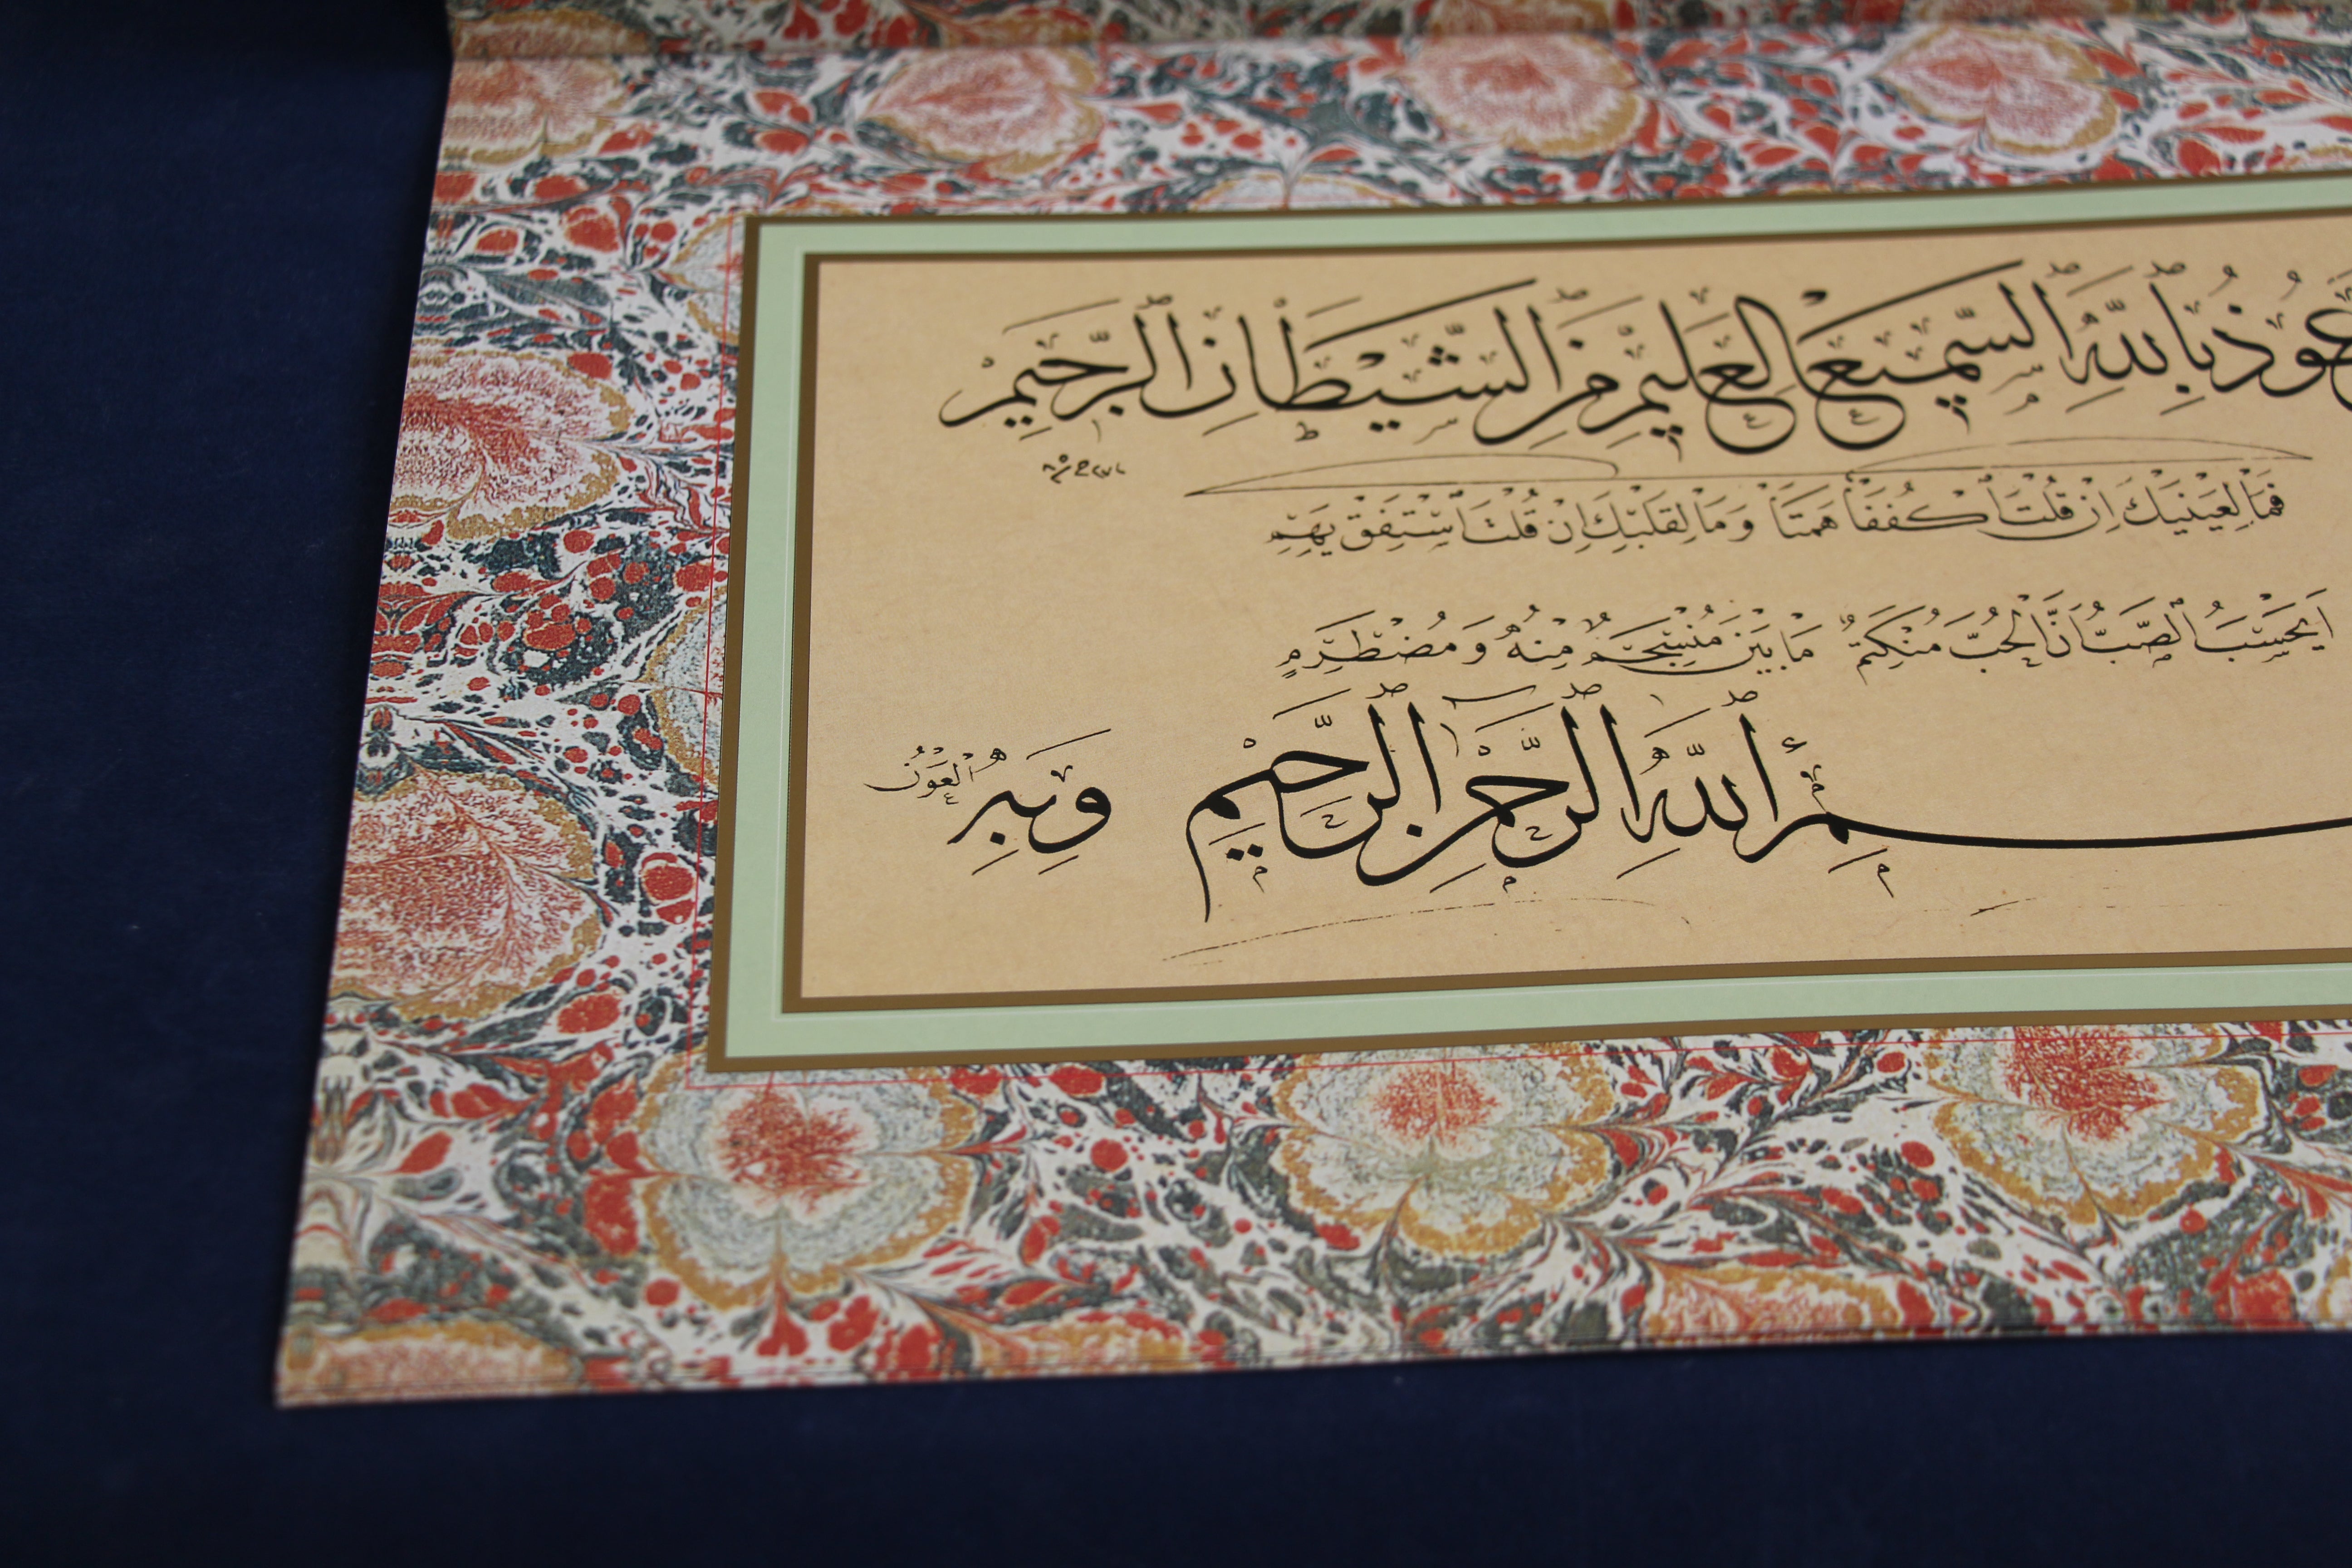 Copy book (mashq) for Thuluth and Naskh scripts - based on work of Mehmed Sevki Efendi